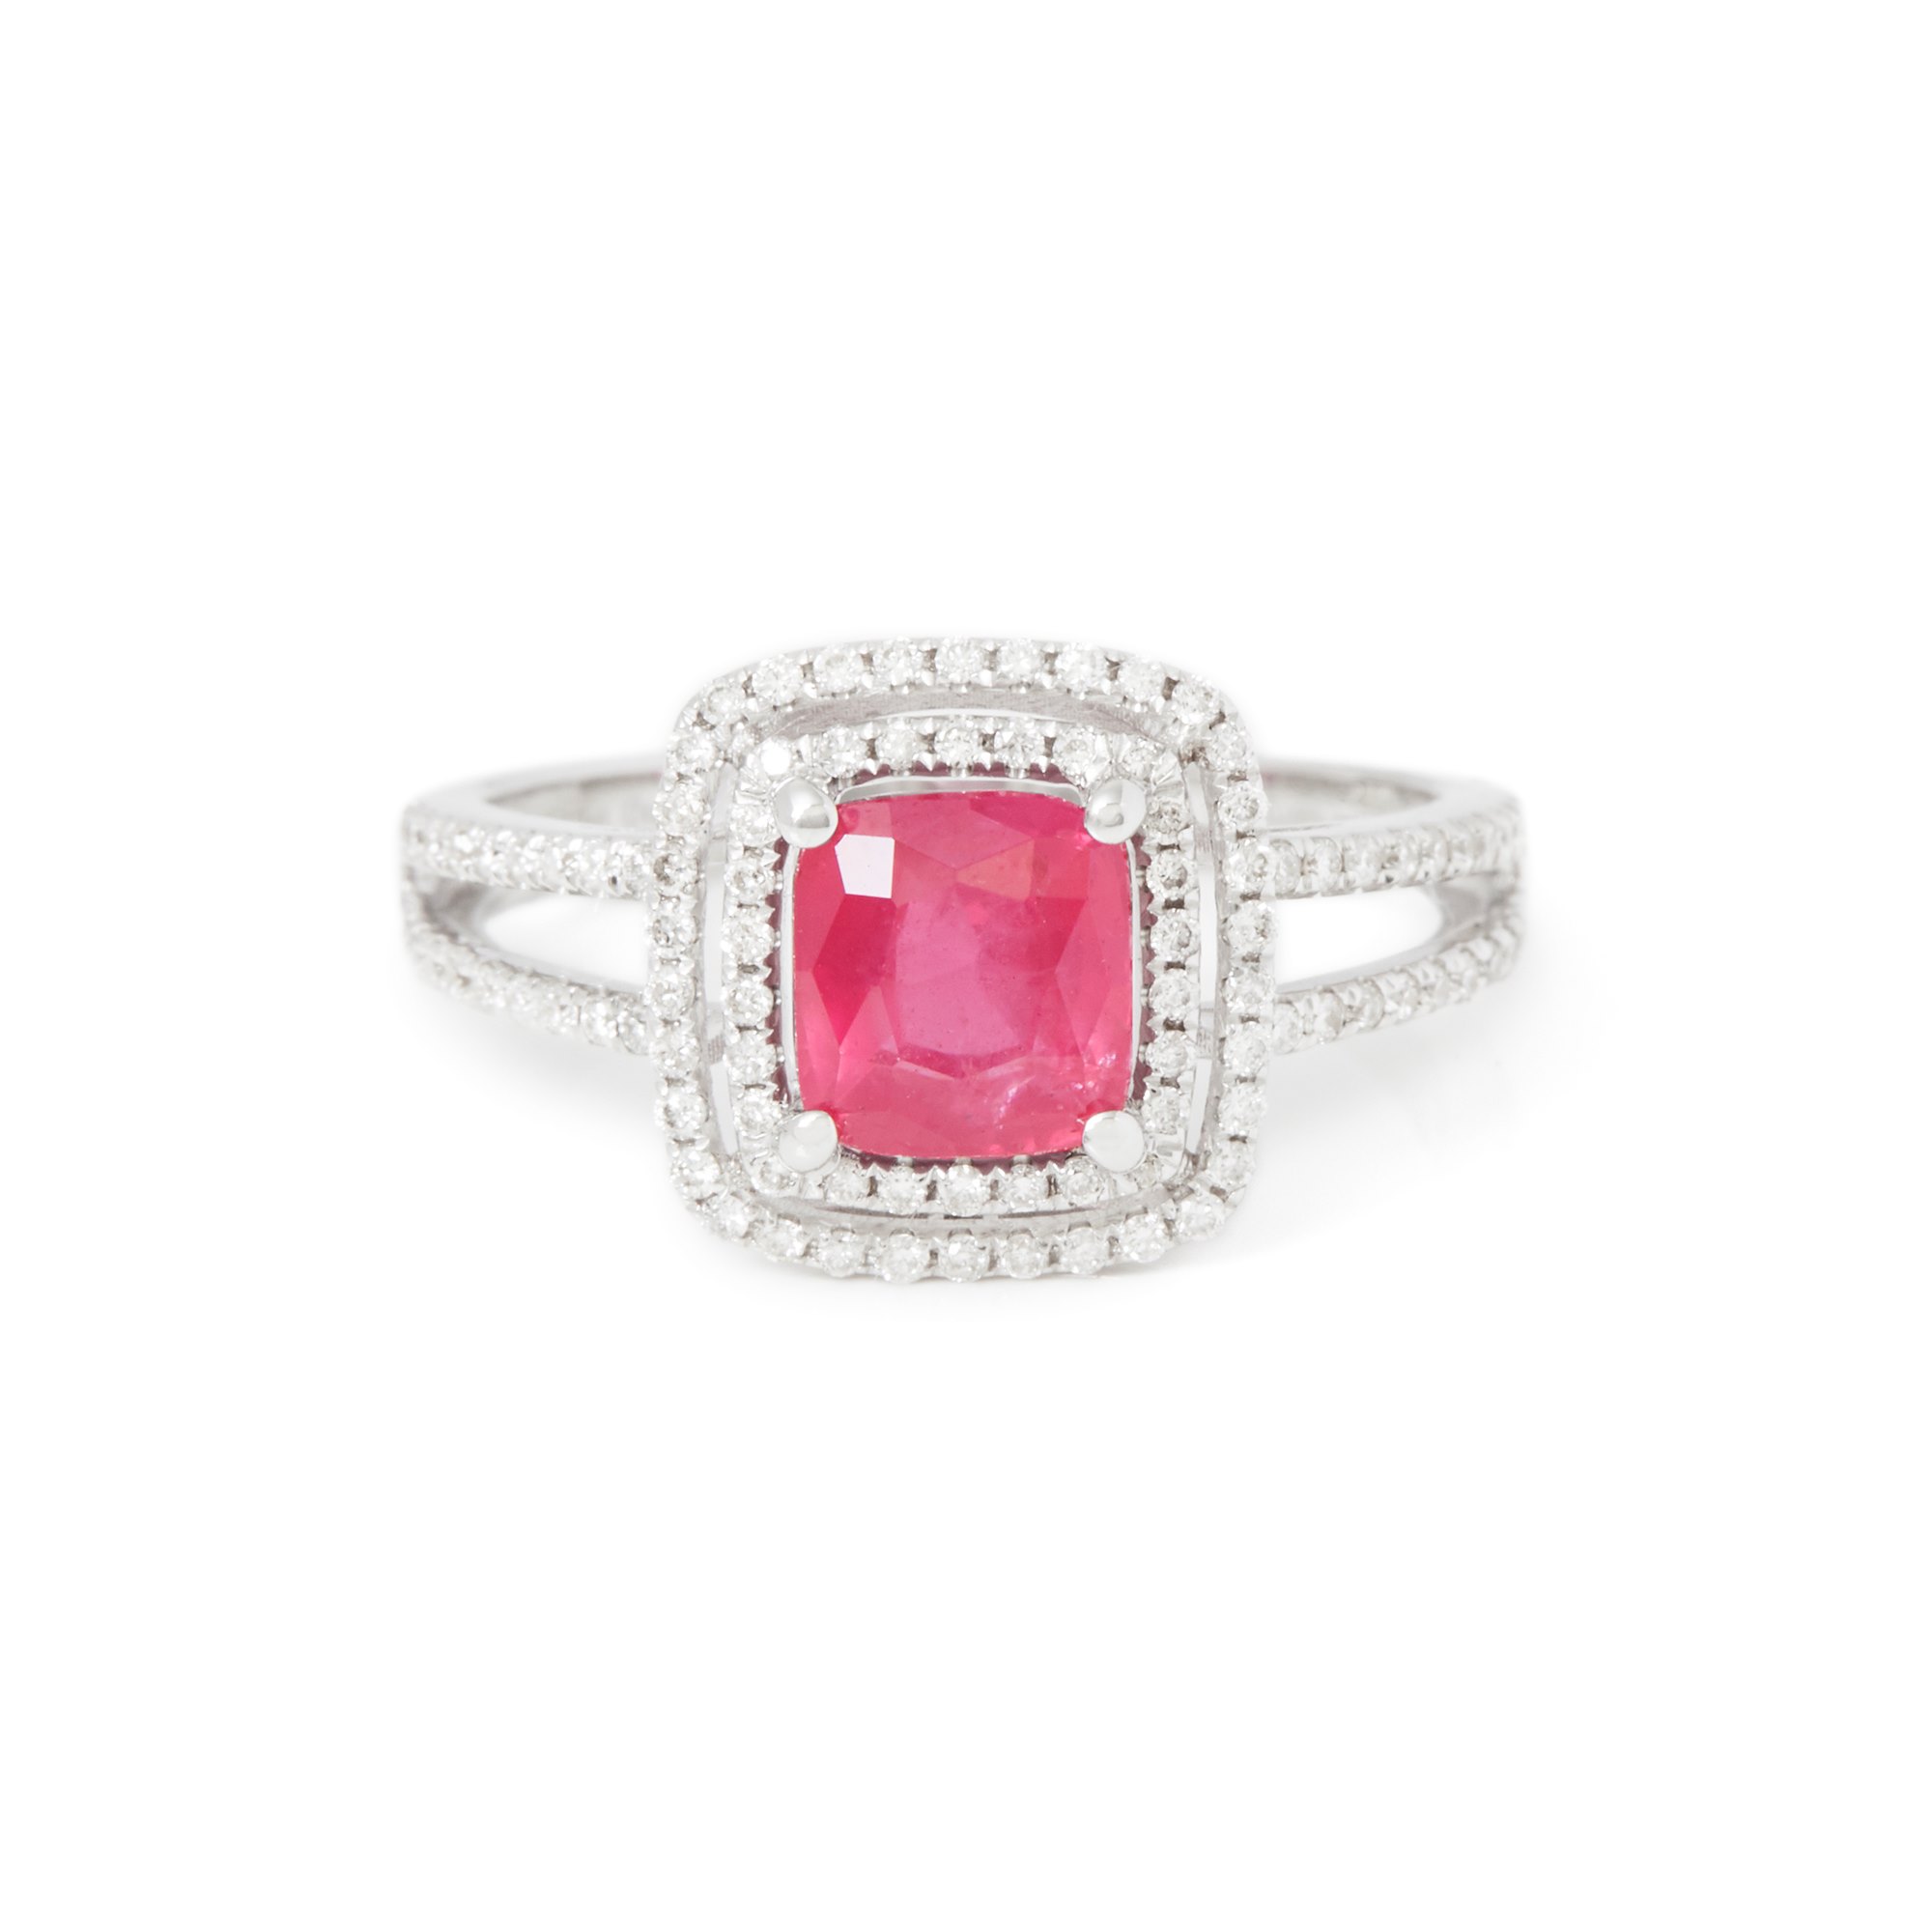 David Jerome Certified 1.85ct Untreated Vietnamese Cushion Cut Ruby and Diamond 18ct Gold Ring